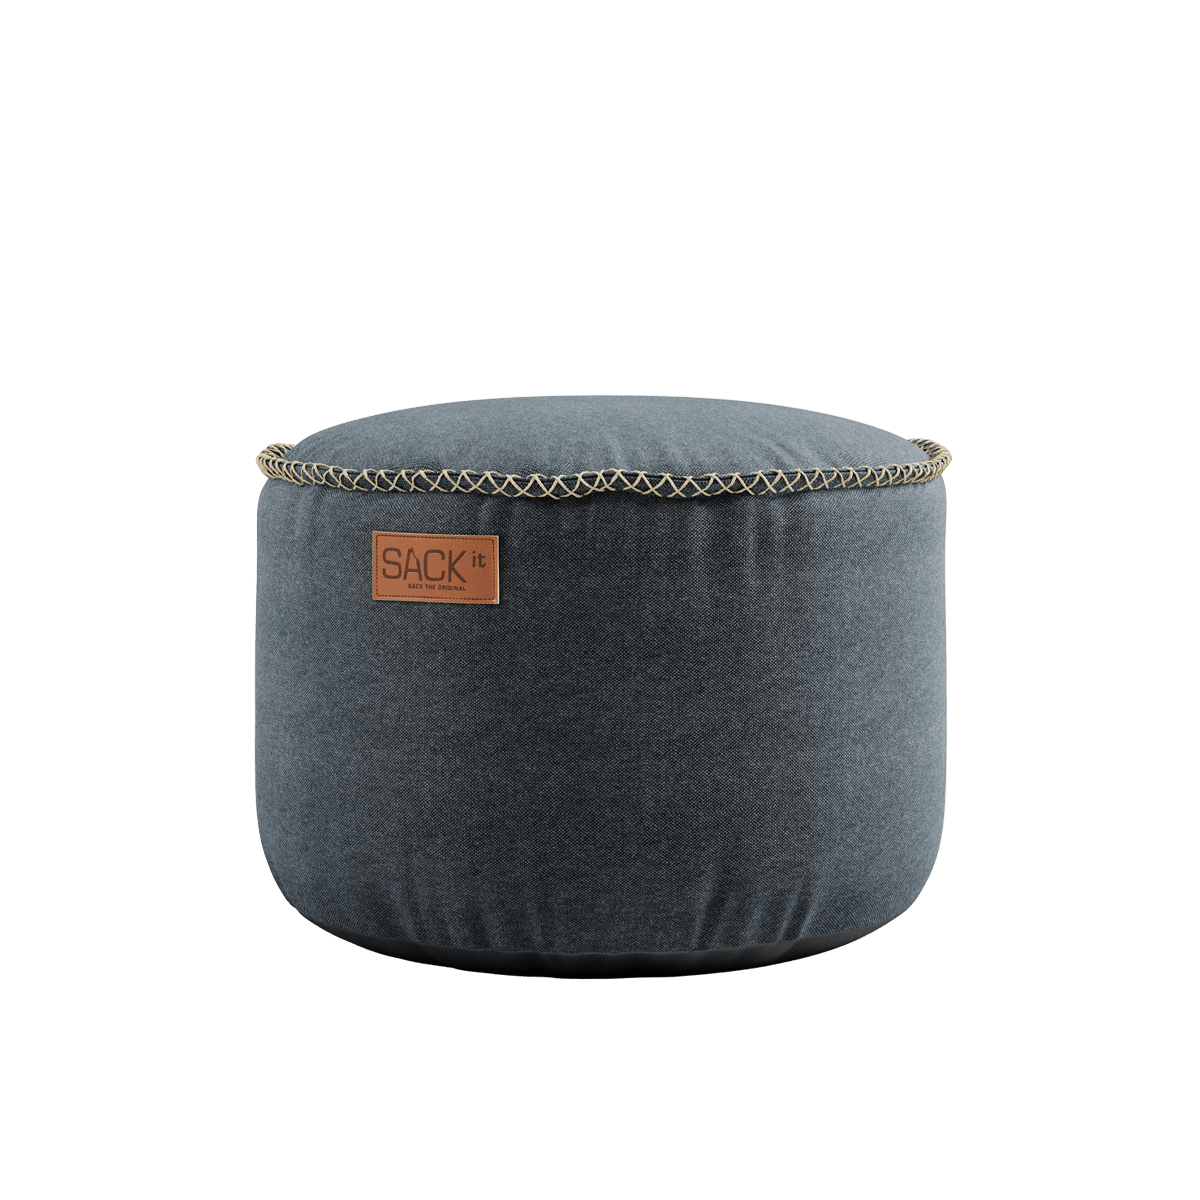 variant_8572003% | Canvas Pouf [Contract] - Canvas Petrol | SACKit